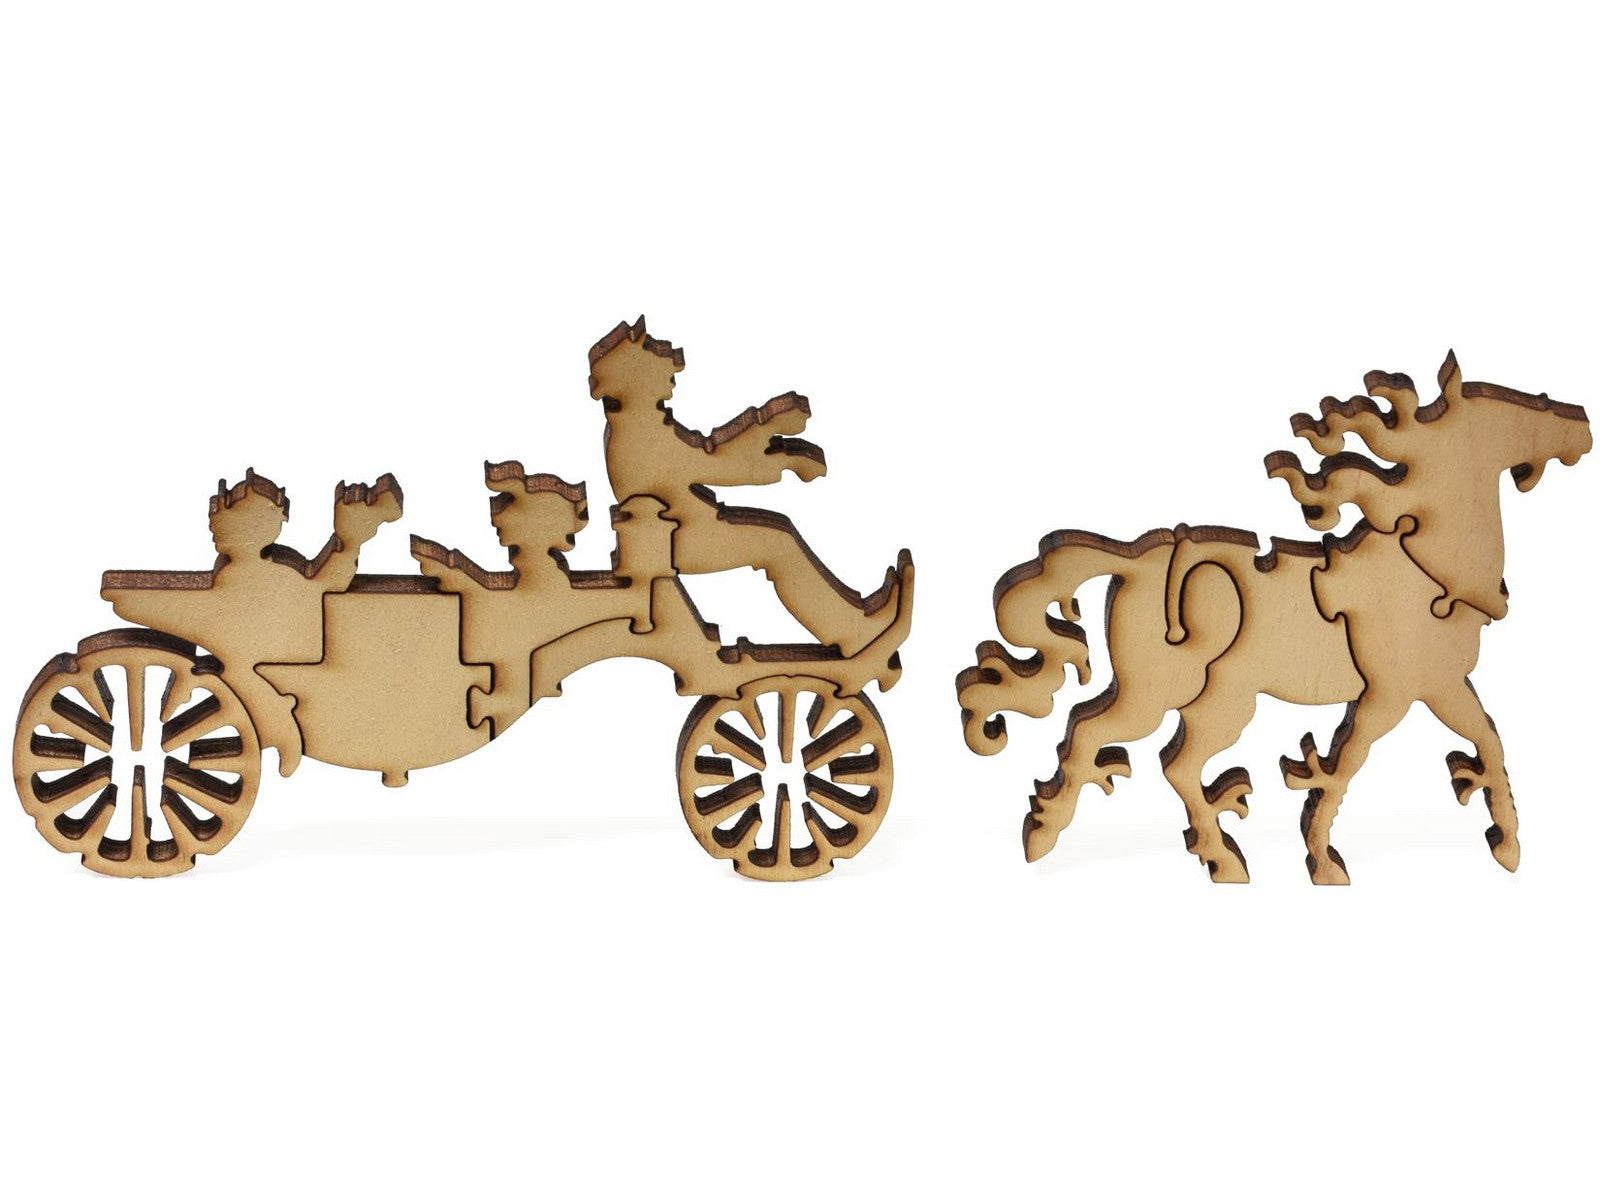 A closeup of pieces showing a horse and riders in a carriage.